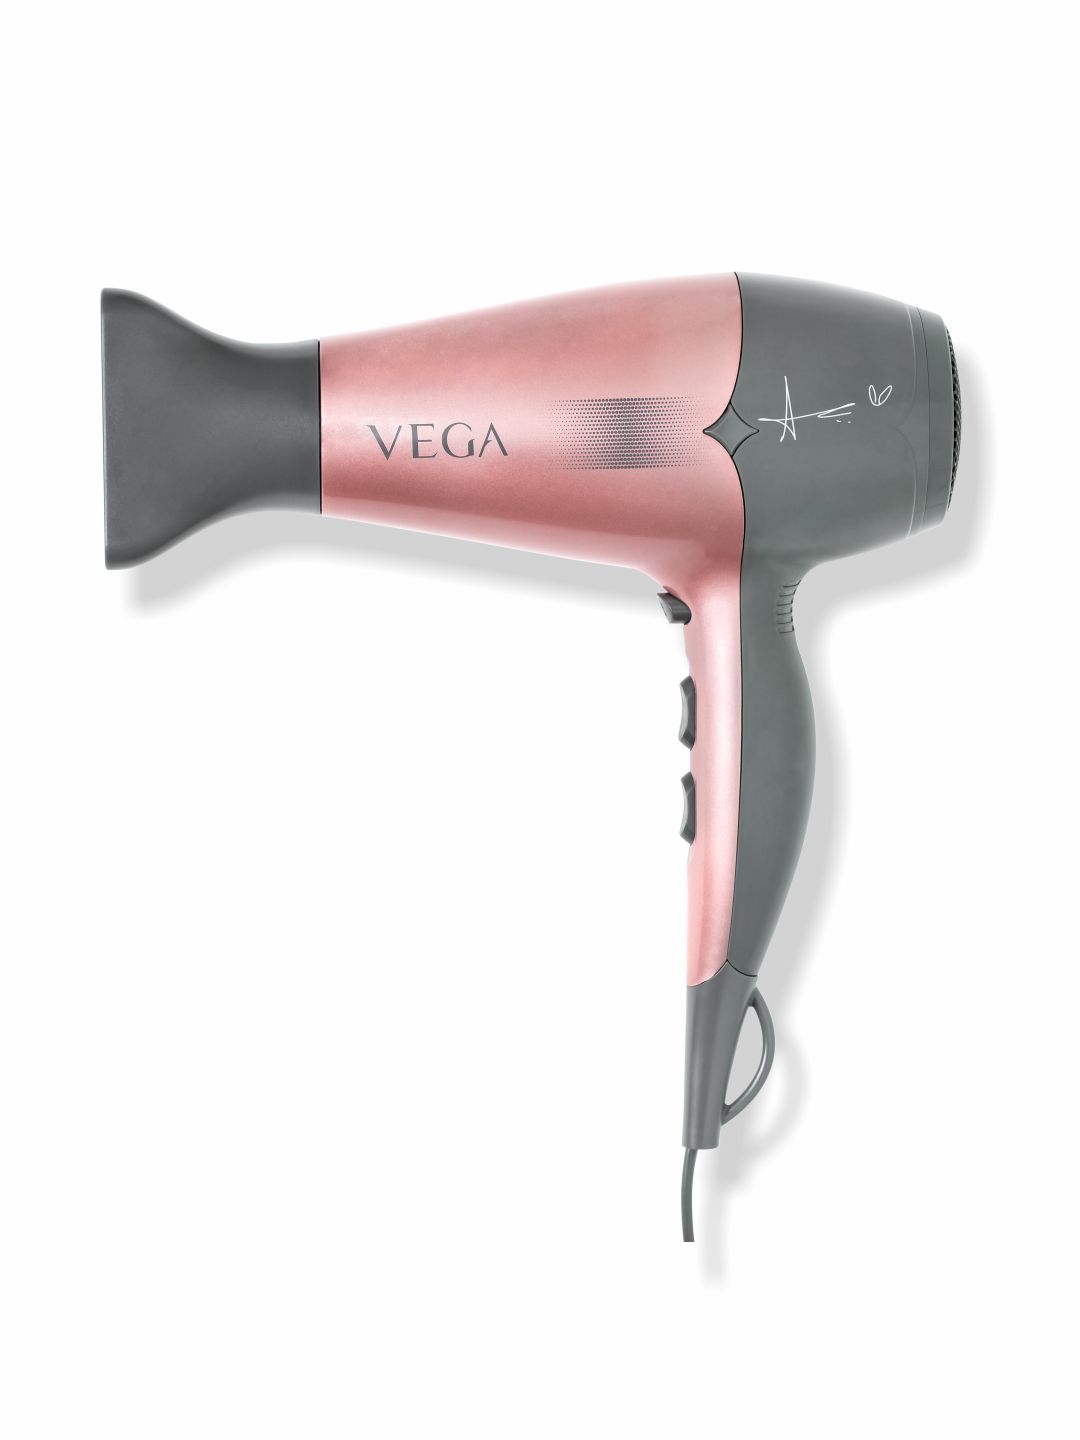 VEGA Ananya Panday Collection Go Pro 2100 Hair Dryer Price in India